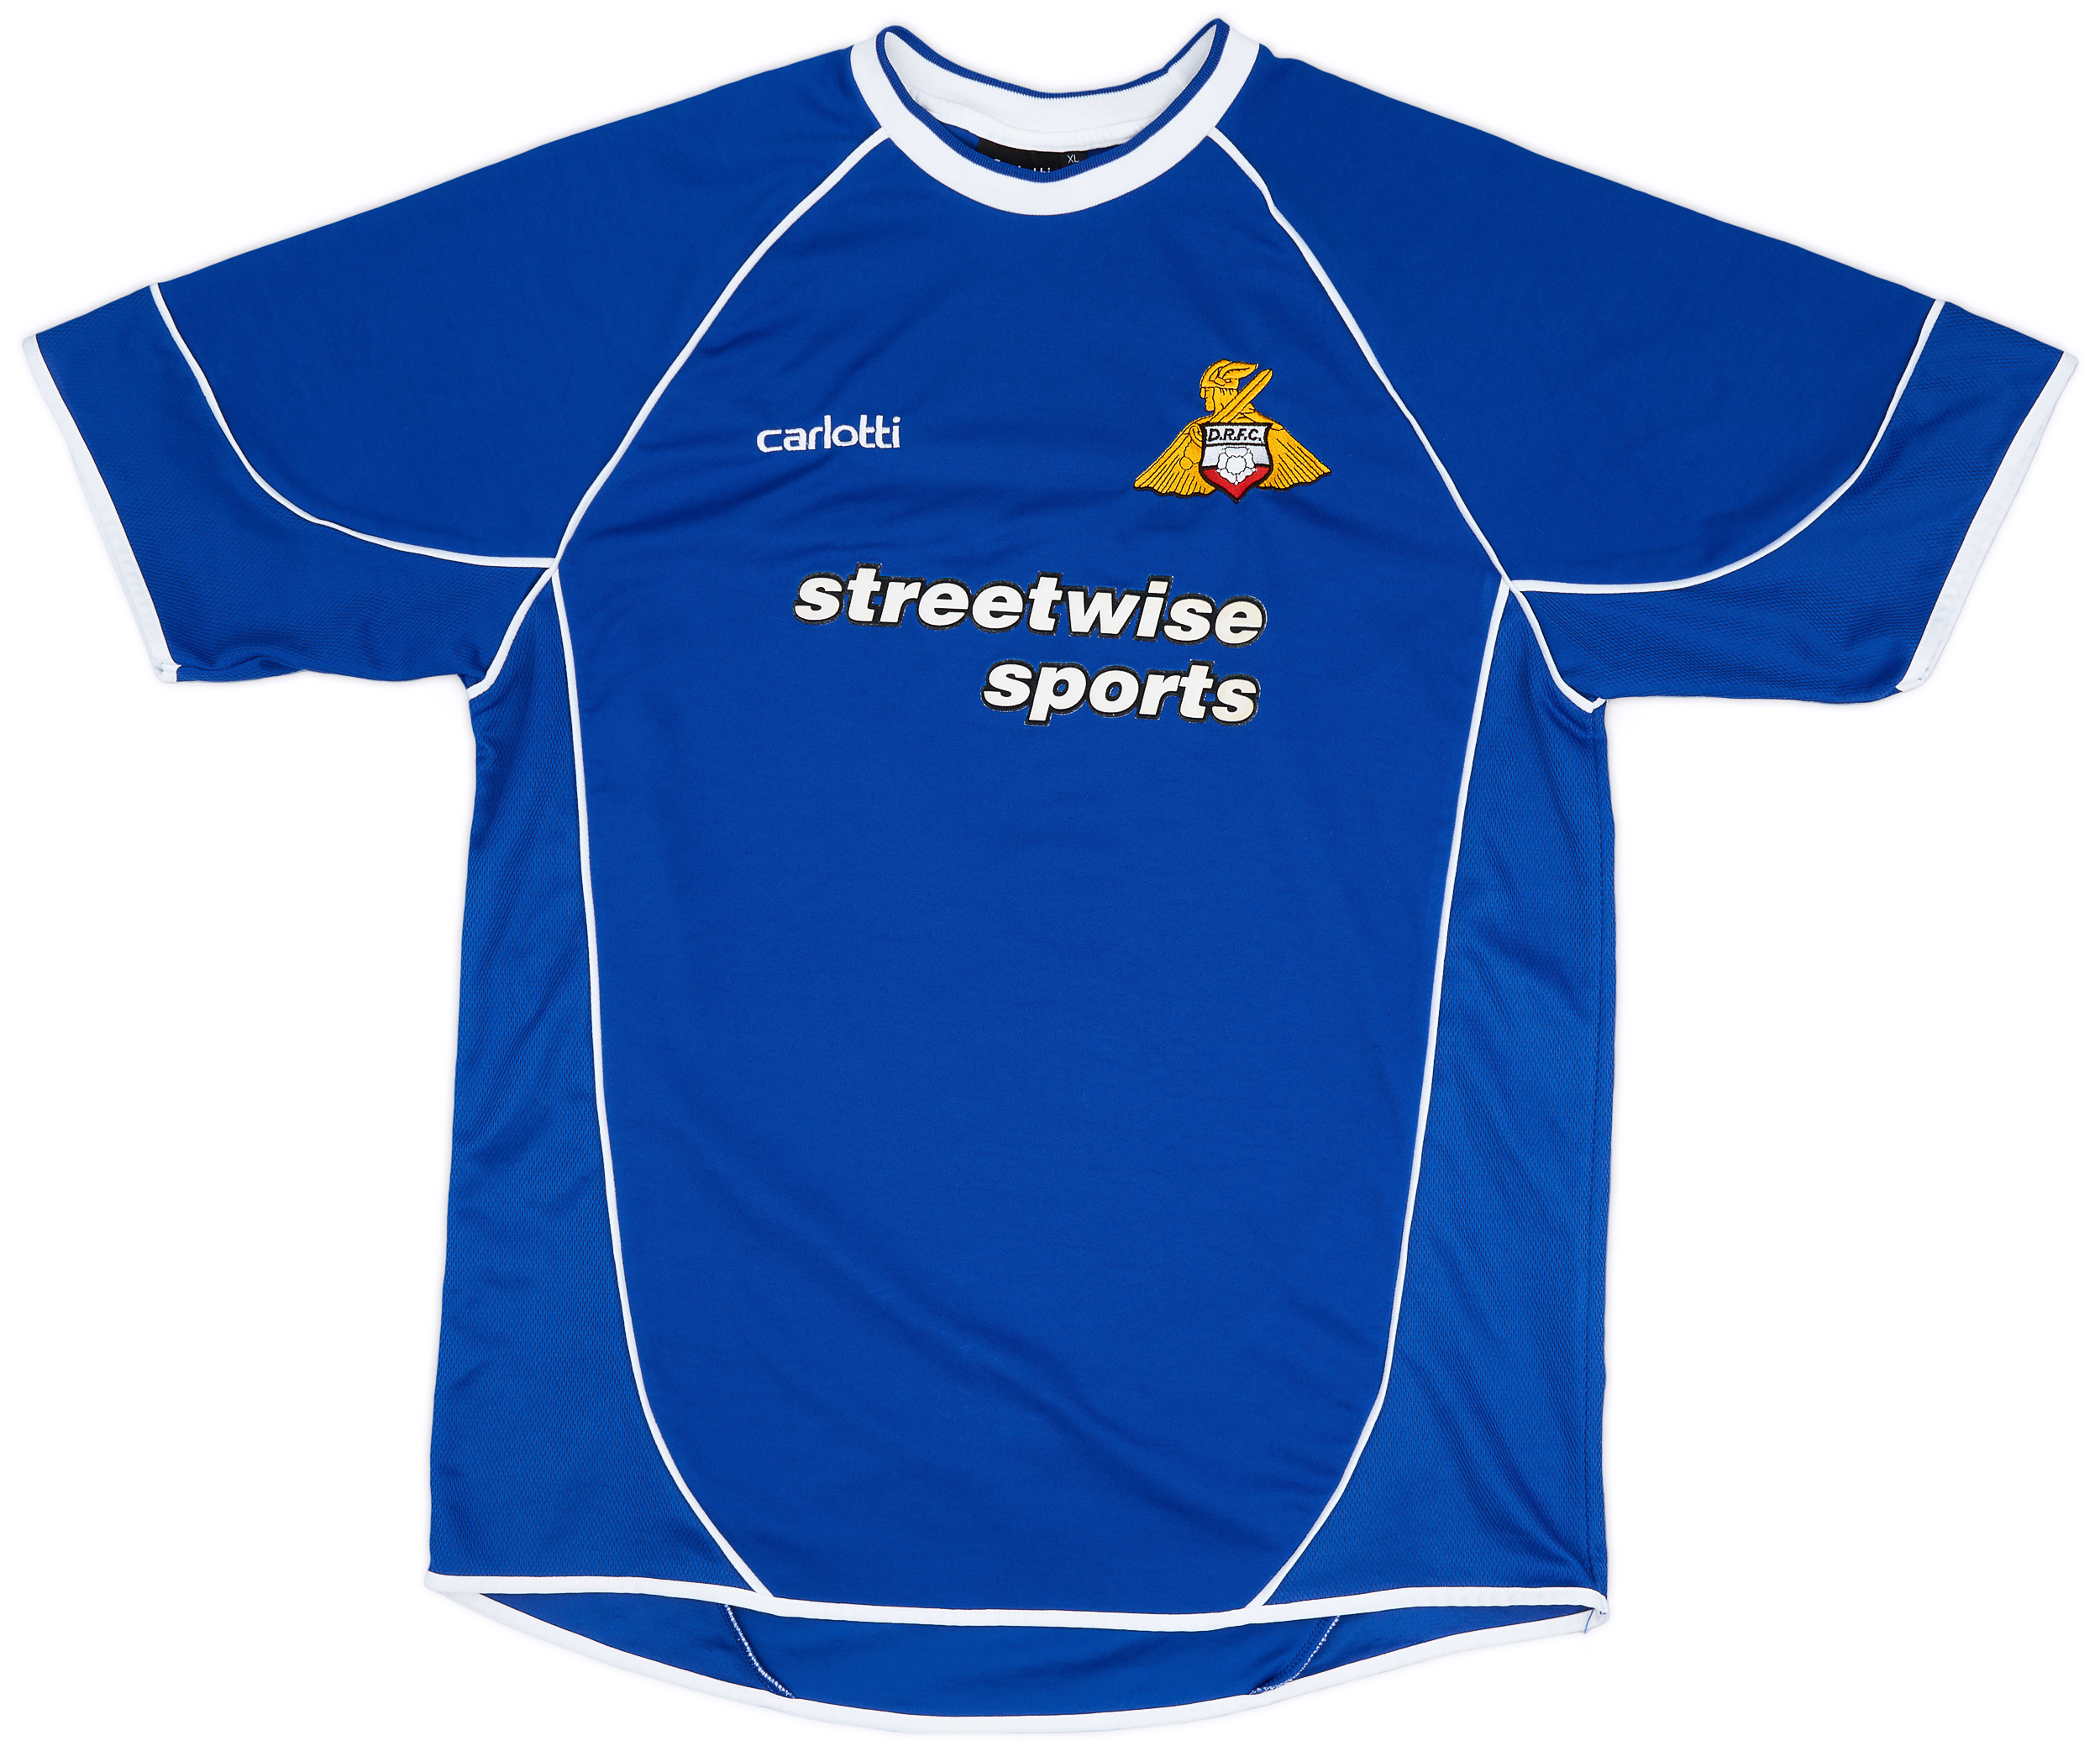 2003-04 Doncaster Rovers Away Shirt - 9/10 - ()